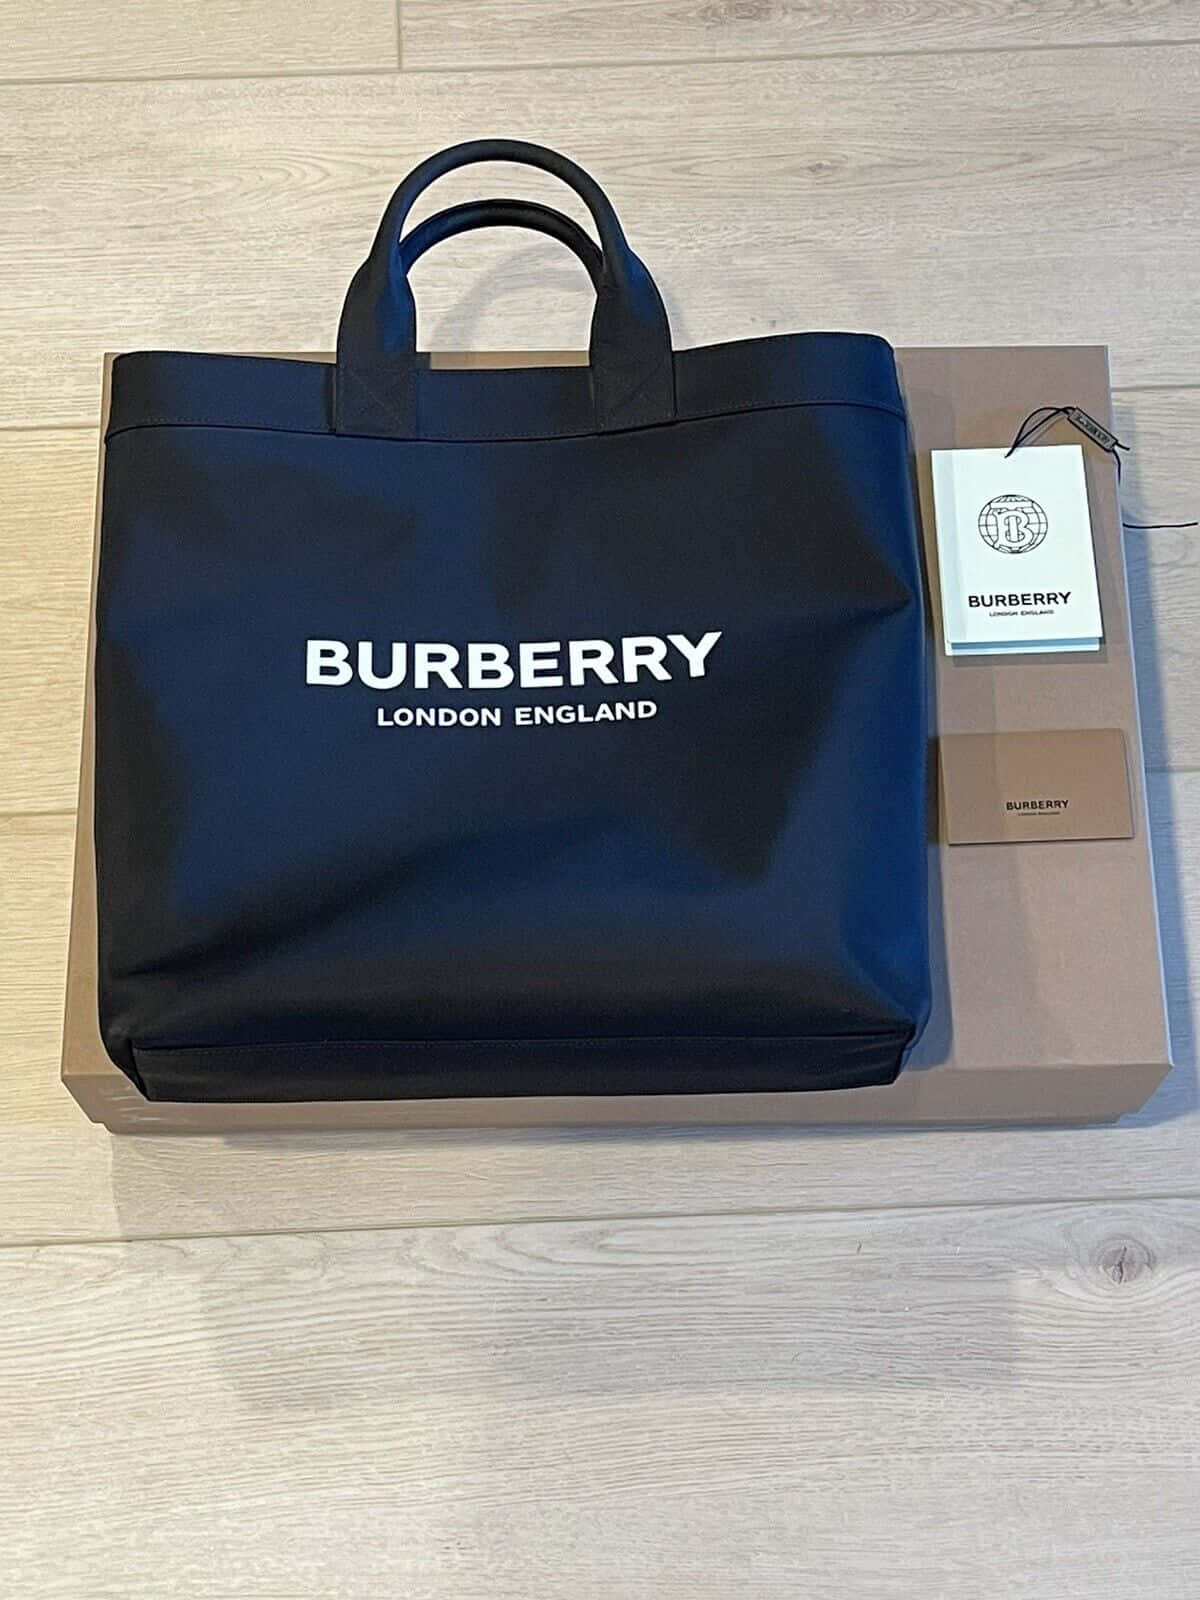 Make a Statement with Burberry